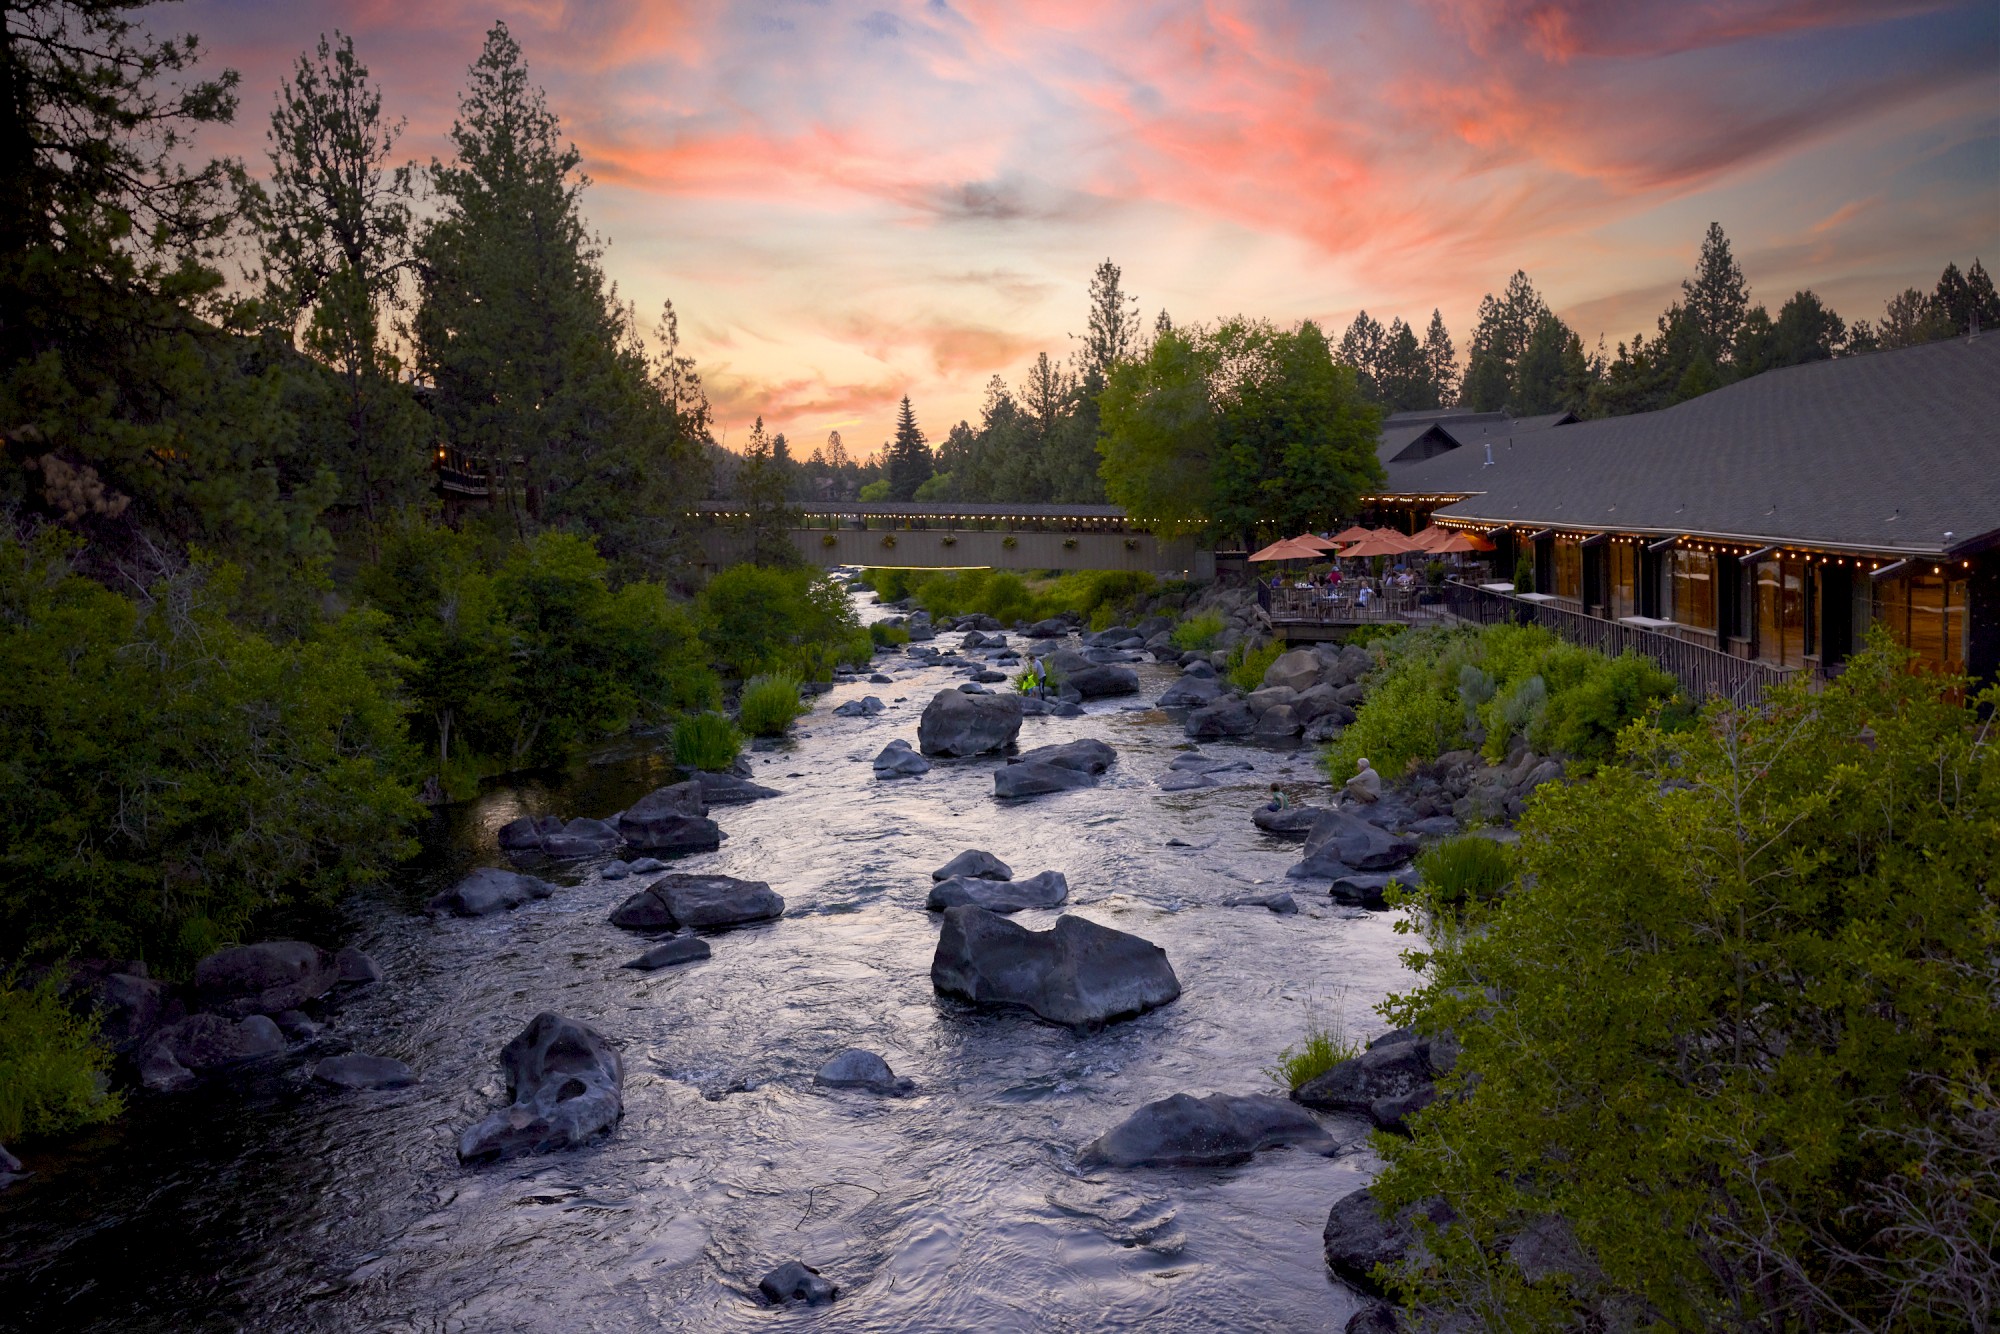 Rippling river with rocks, trees, sunset sky, and Riverhouse in Bend, Oregon on the right side.